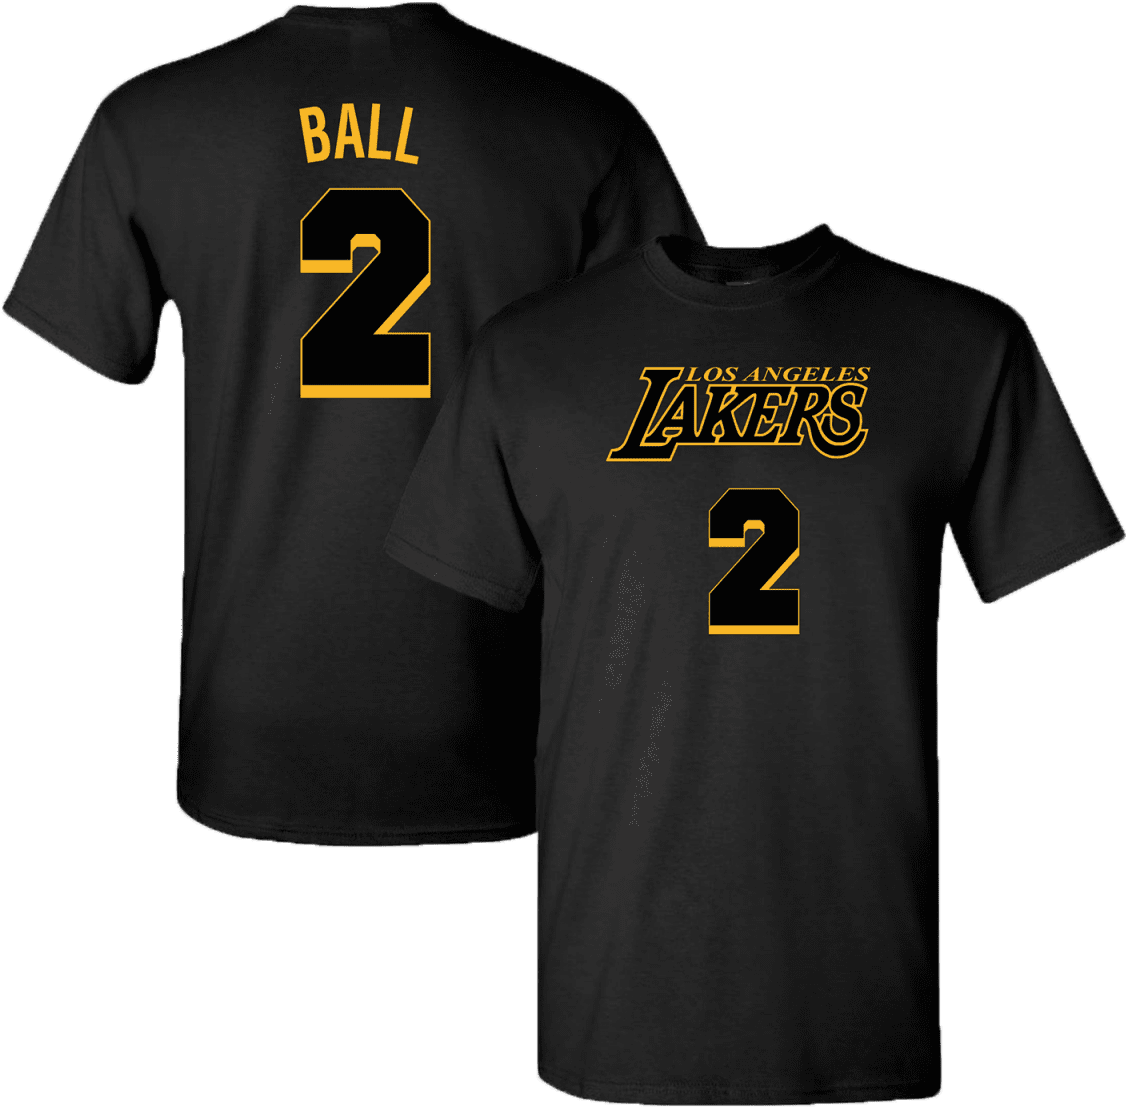 A Black Shirt With Yellow Letters And Numbers